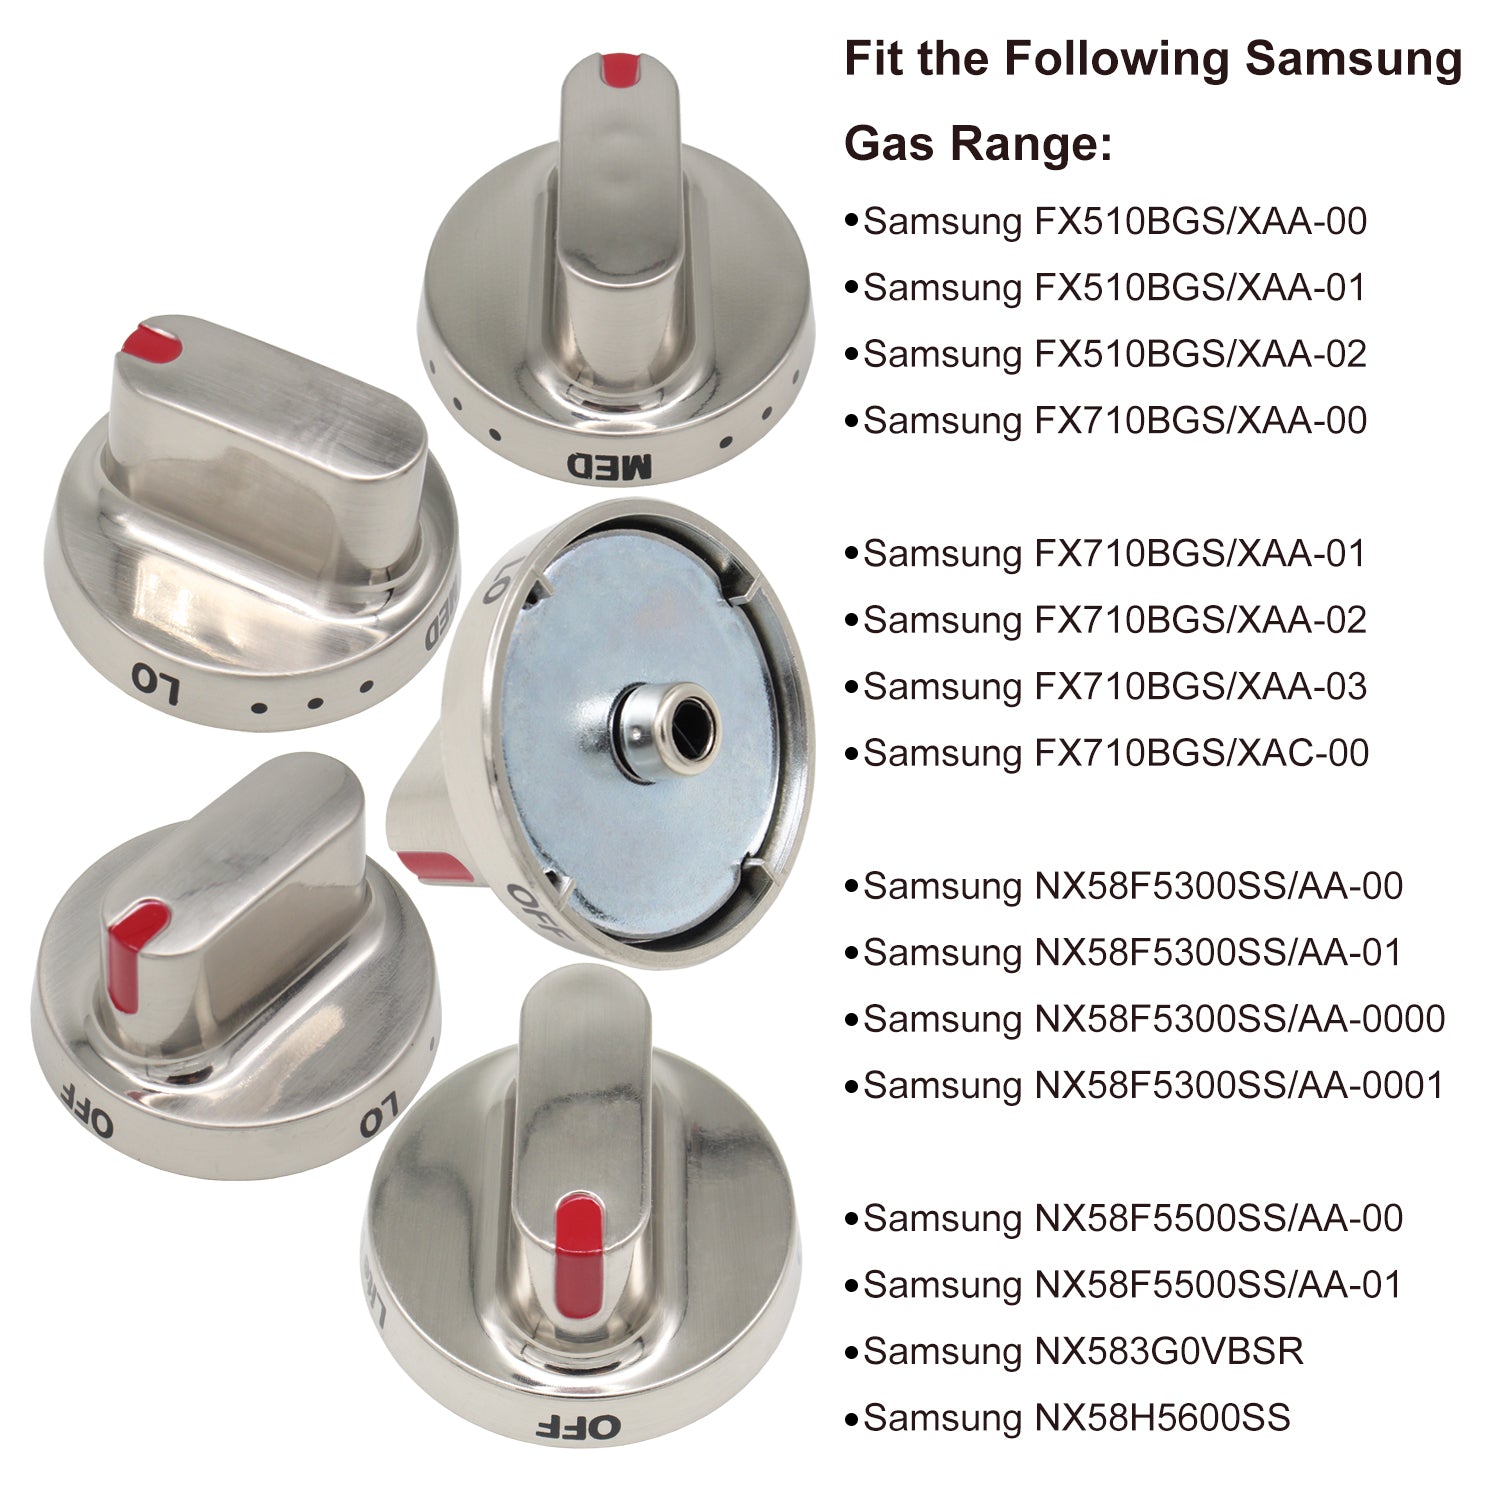 S-Union [Upgraded] DG64-00472A DG64-00347A Dial Stainless Steel Knob Compatible with Samsung Range Oven Gas Stove, Replaces for FX510BGS, FX710BGS, NX58F5300SS, NX58F5500S, AP5949480 (5 Pack)